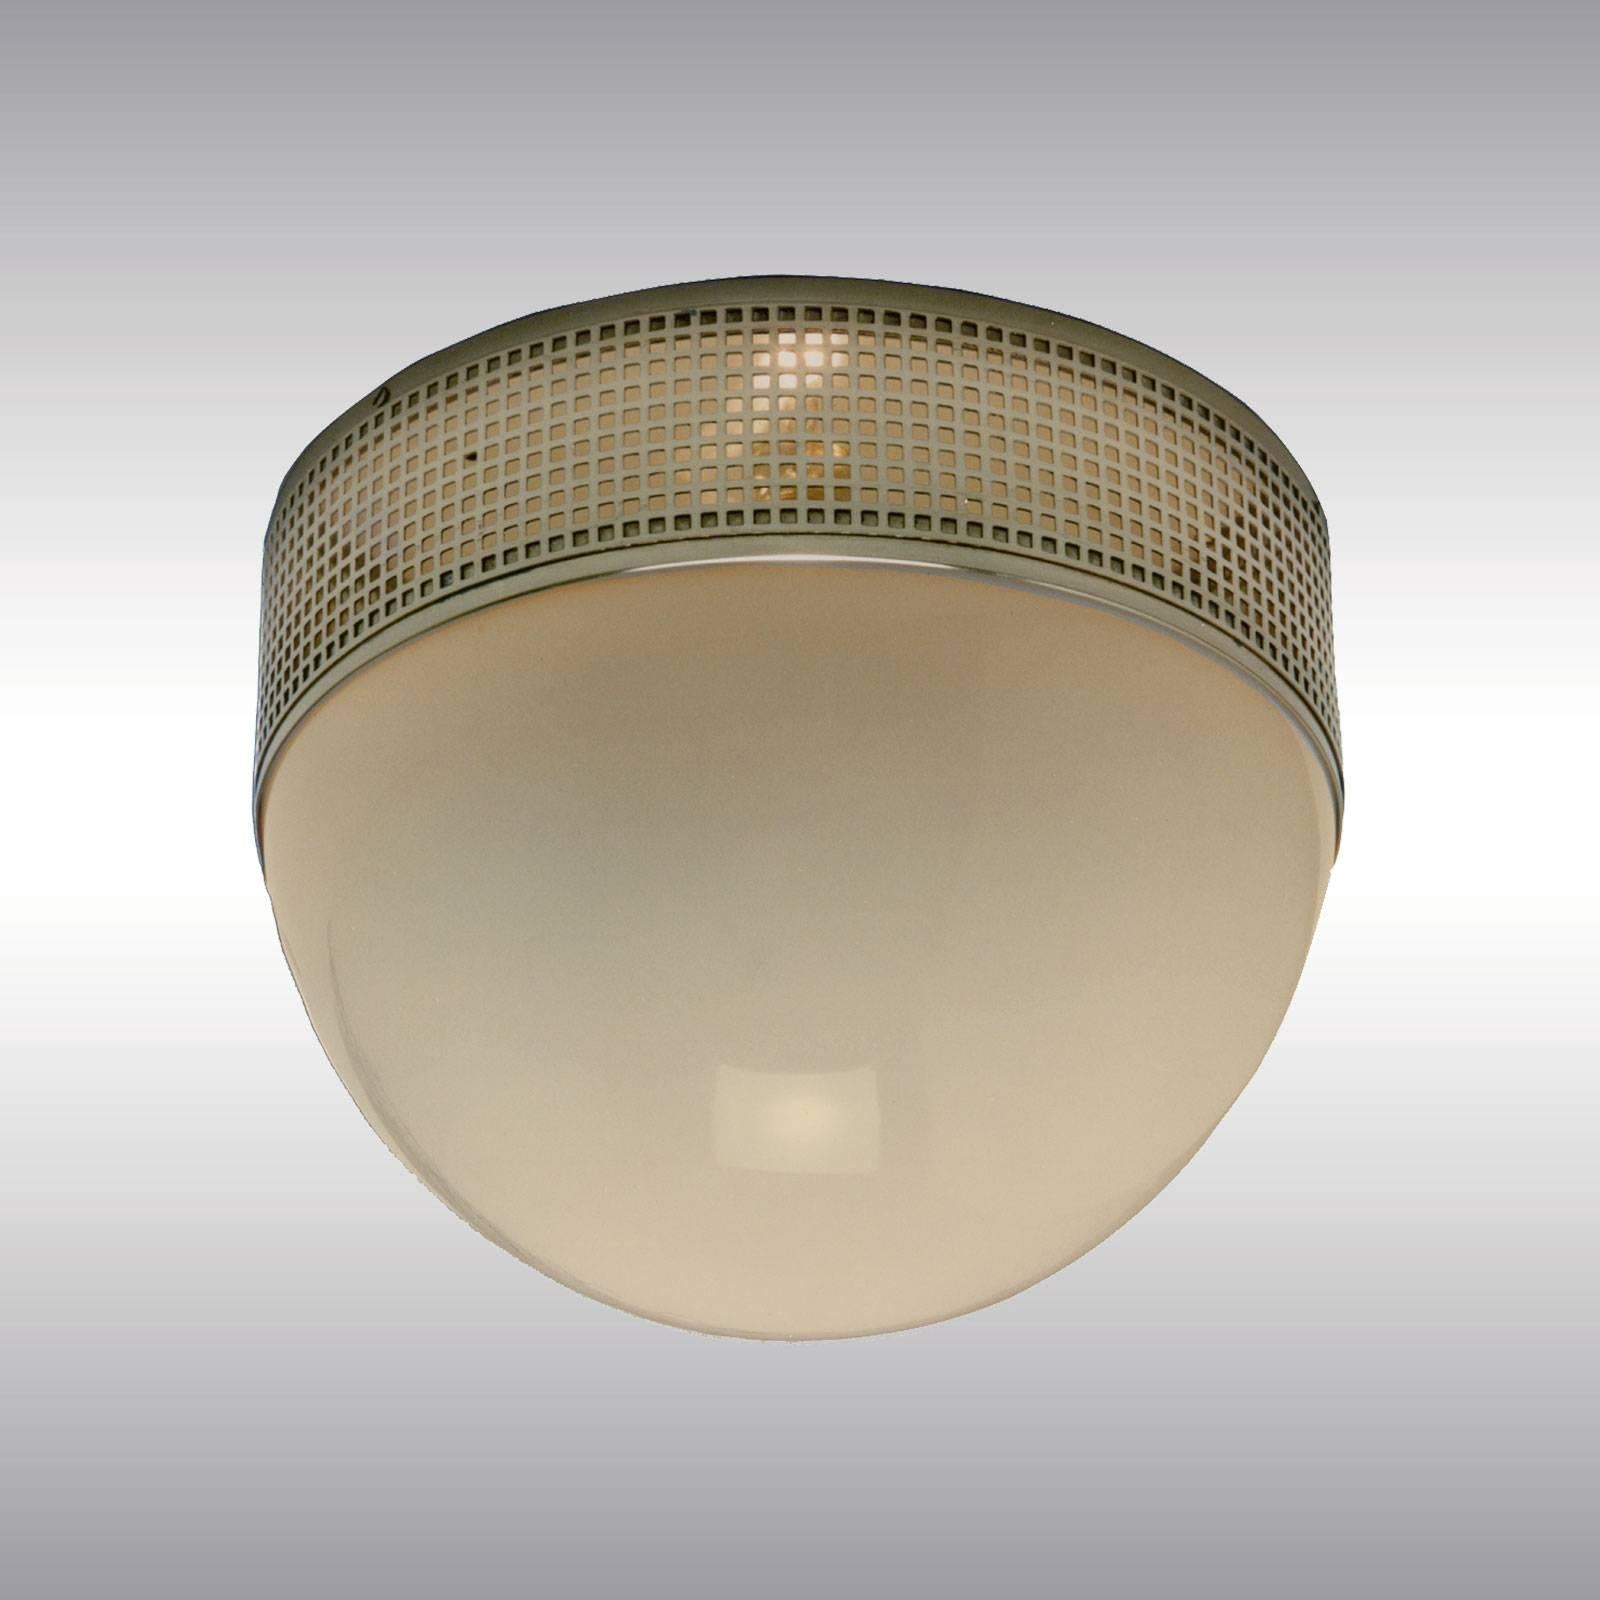 Very elegant flush mounted ceiling-lamp, light comes out and makes wonderful pattern on the ceiling. This lamp is as well available in a larger version: 50 cm (19.69 inch). 

All components according to the UL regulations, with an additional